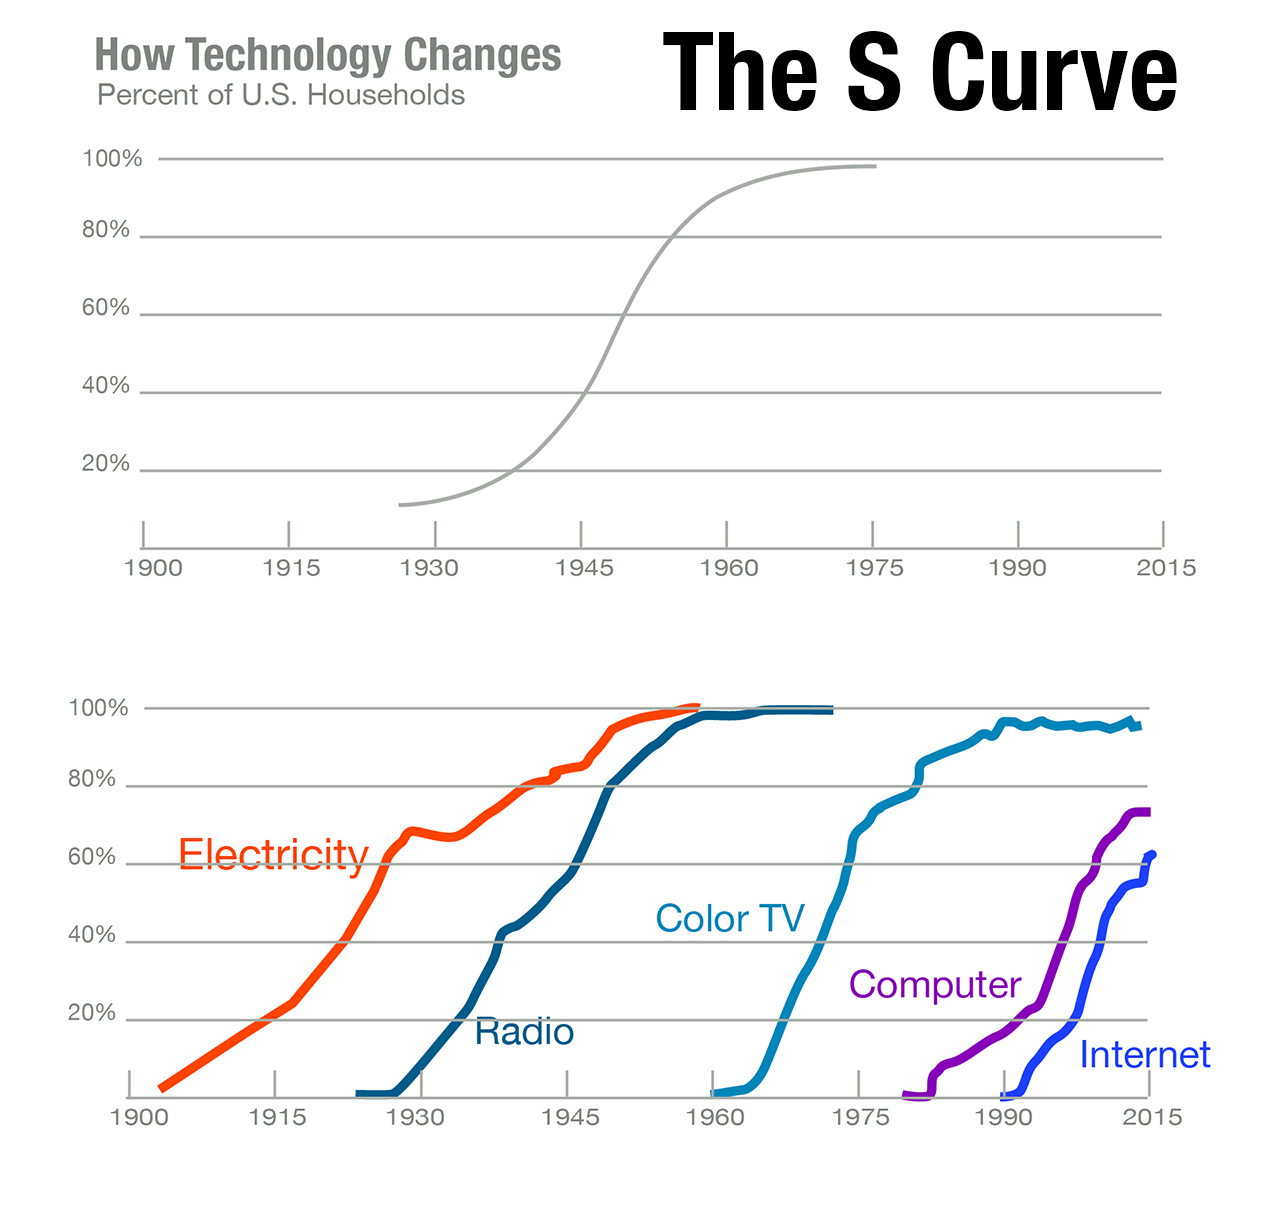 The Technology S Curve (described by Peter Sinclair)